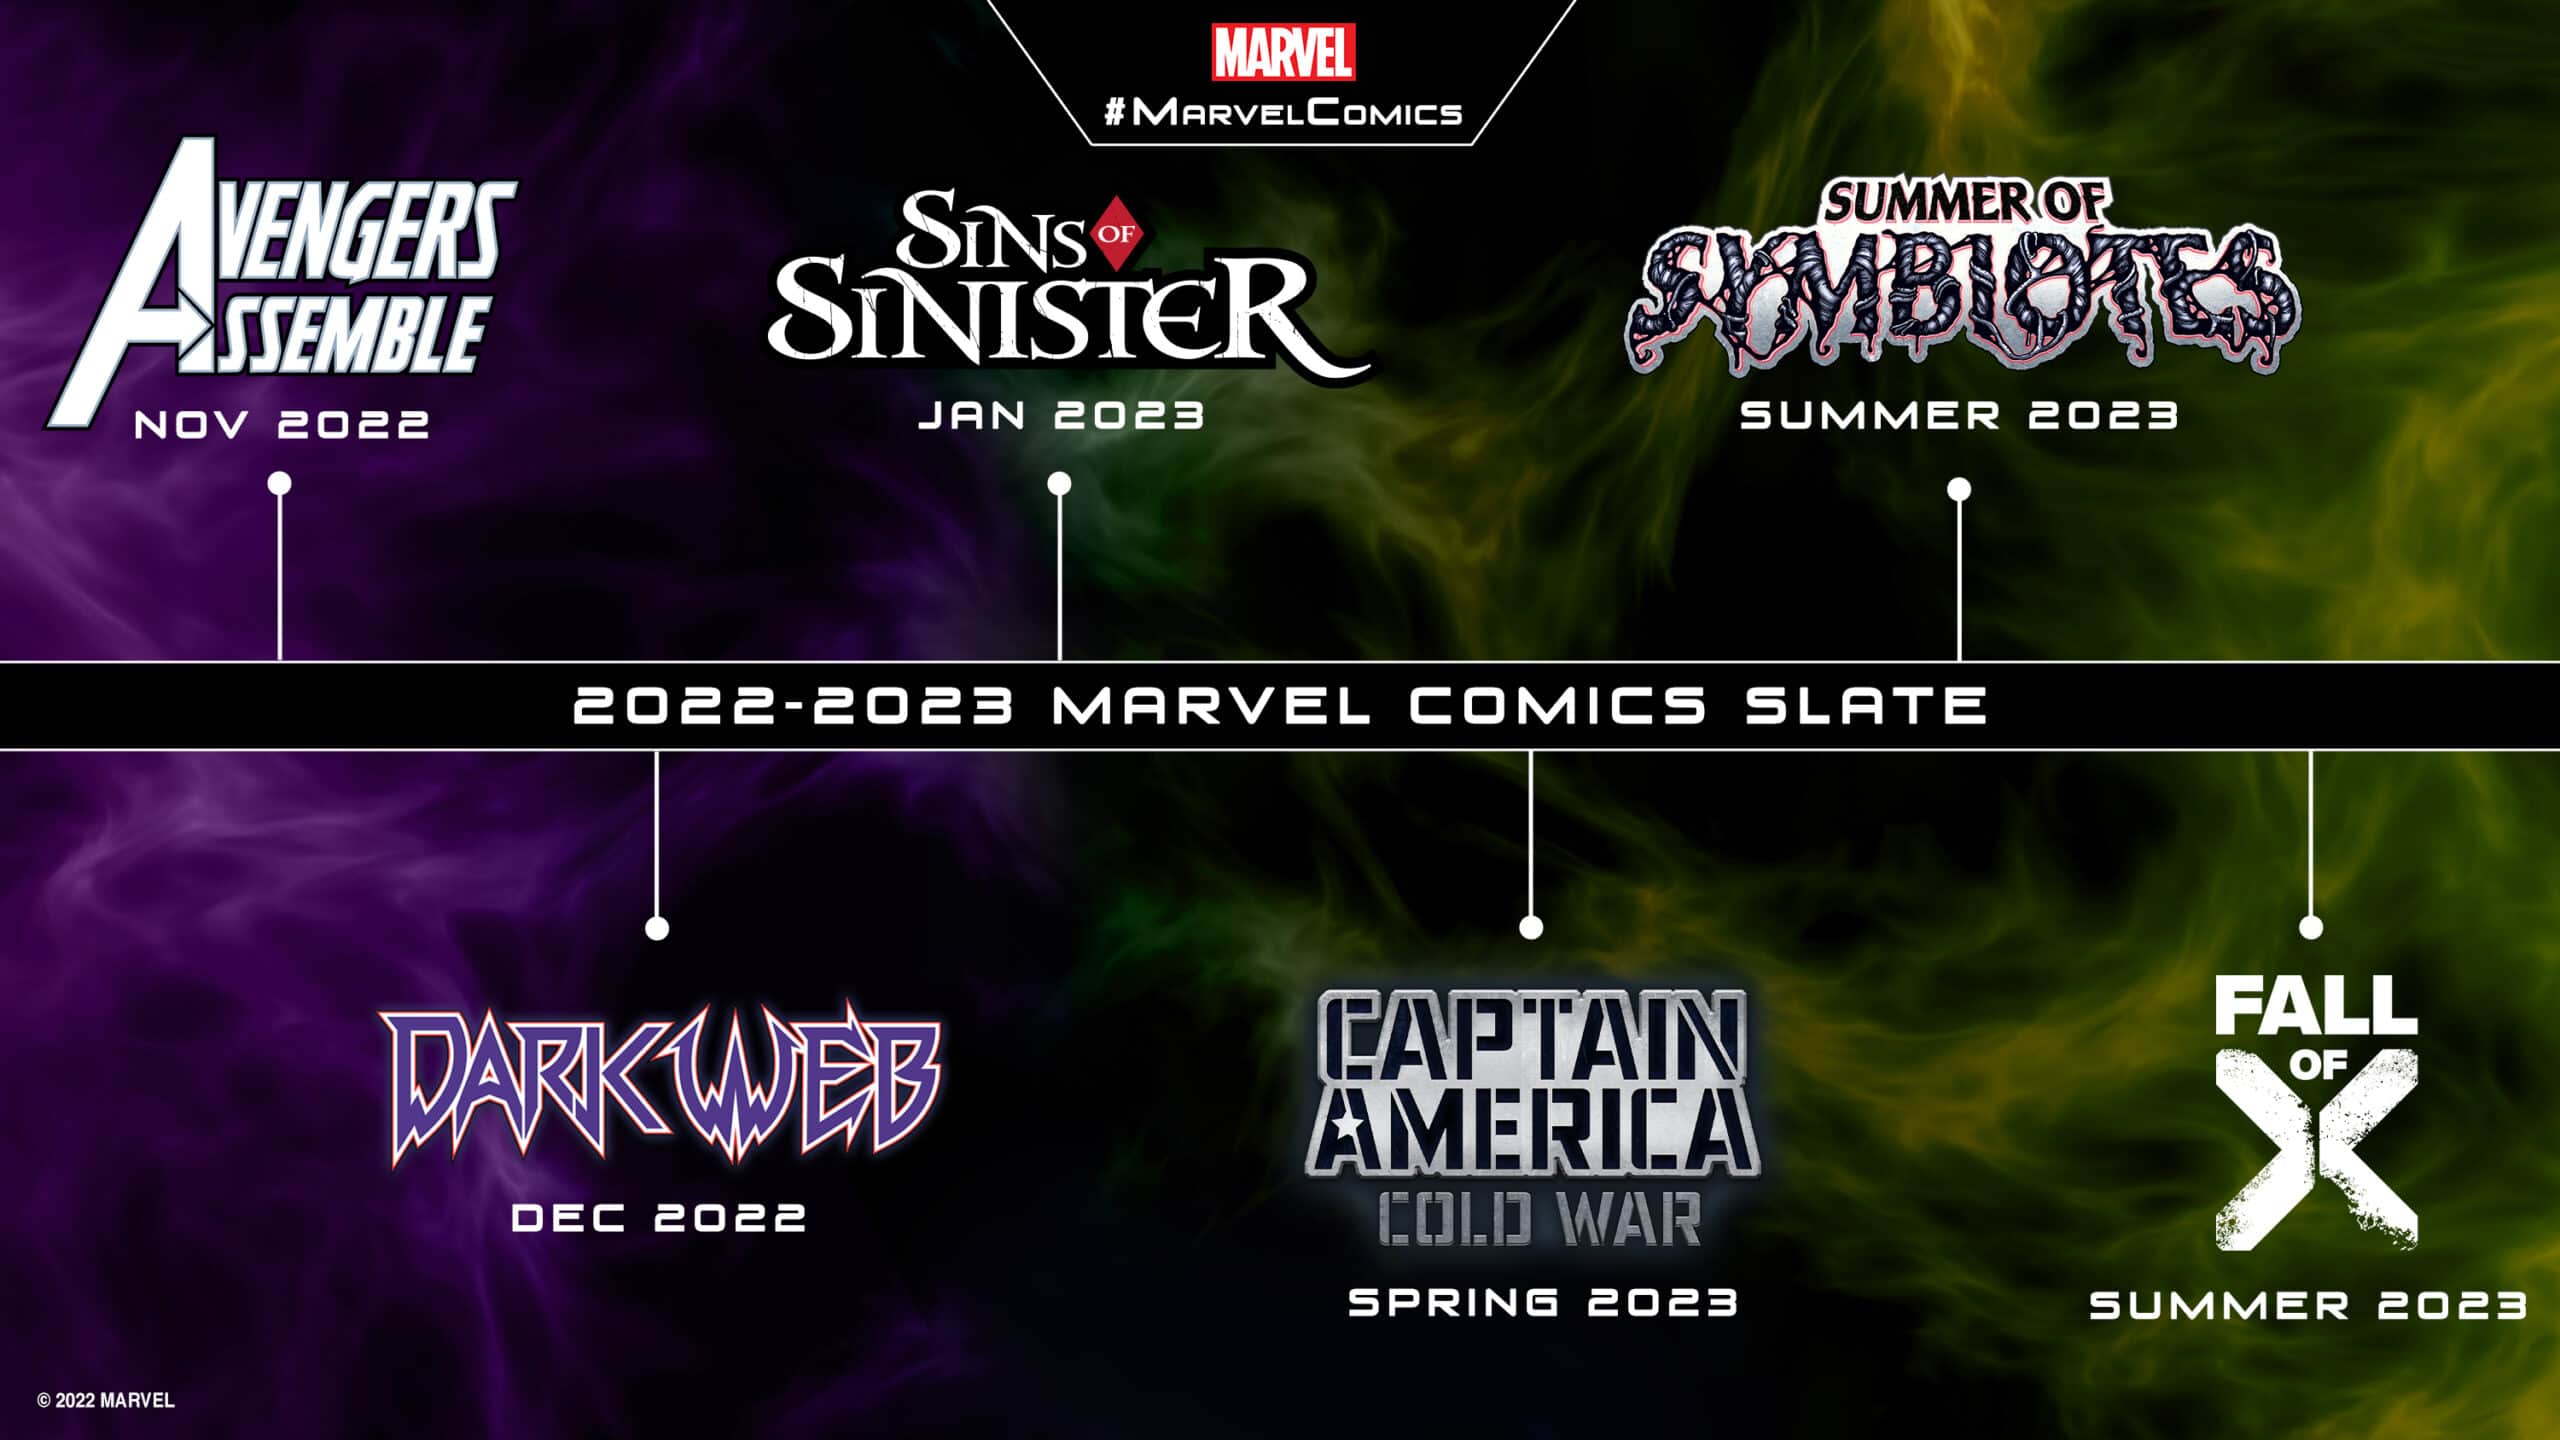 NYCC MARVEL Outlines Its Comic Schedule with XMen, Spider